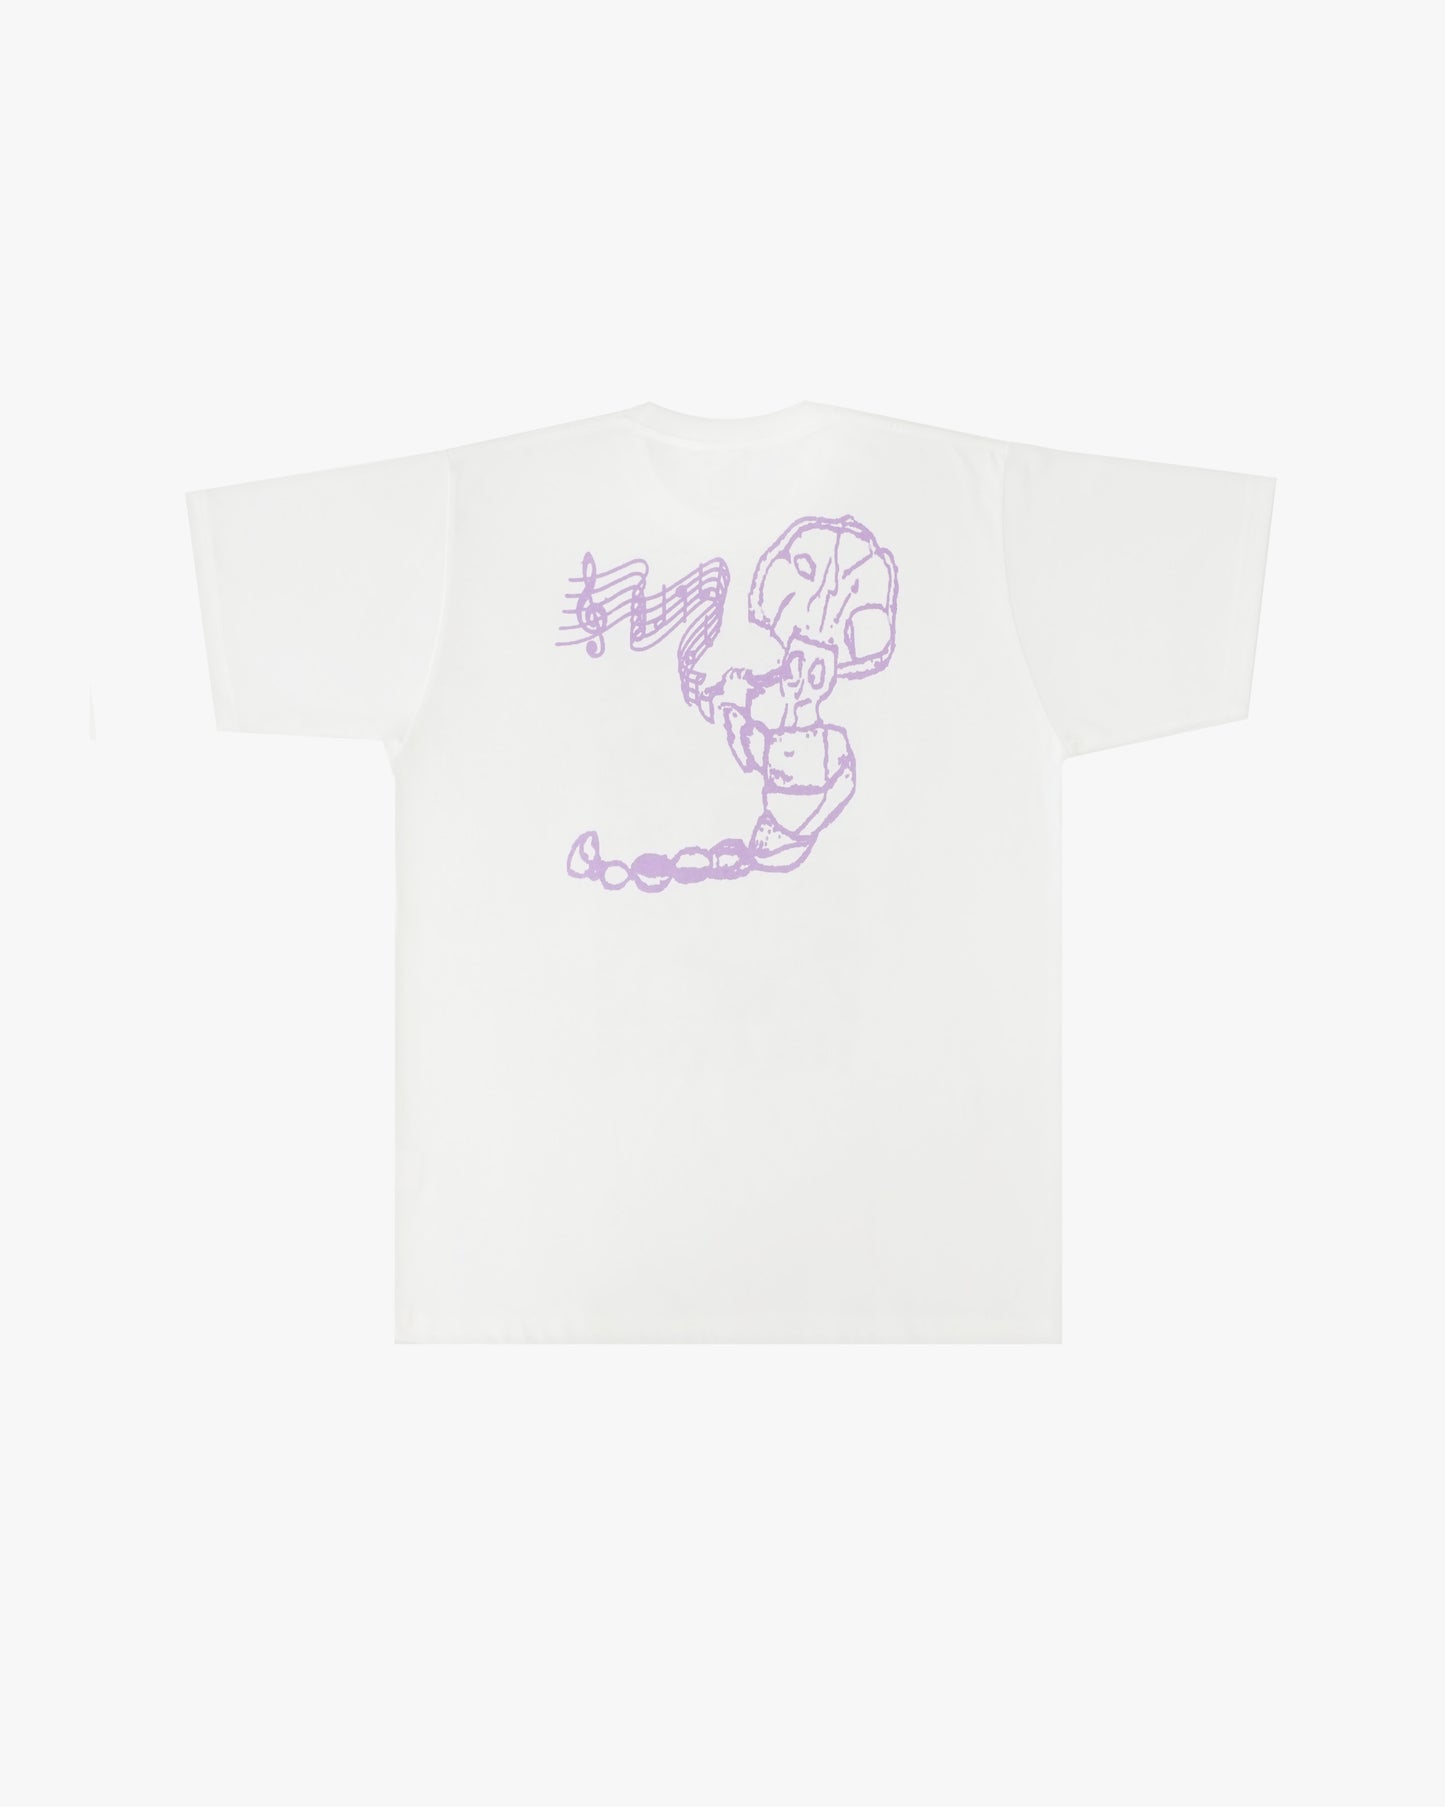 GOOD MORNING TAPES - Food Of The Gods SS Tee